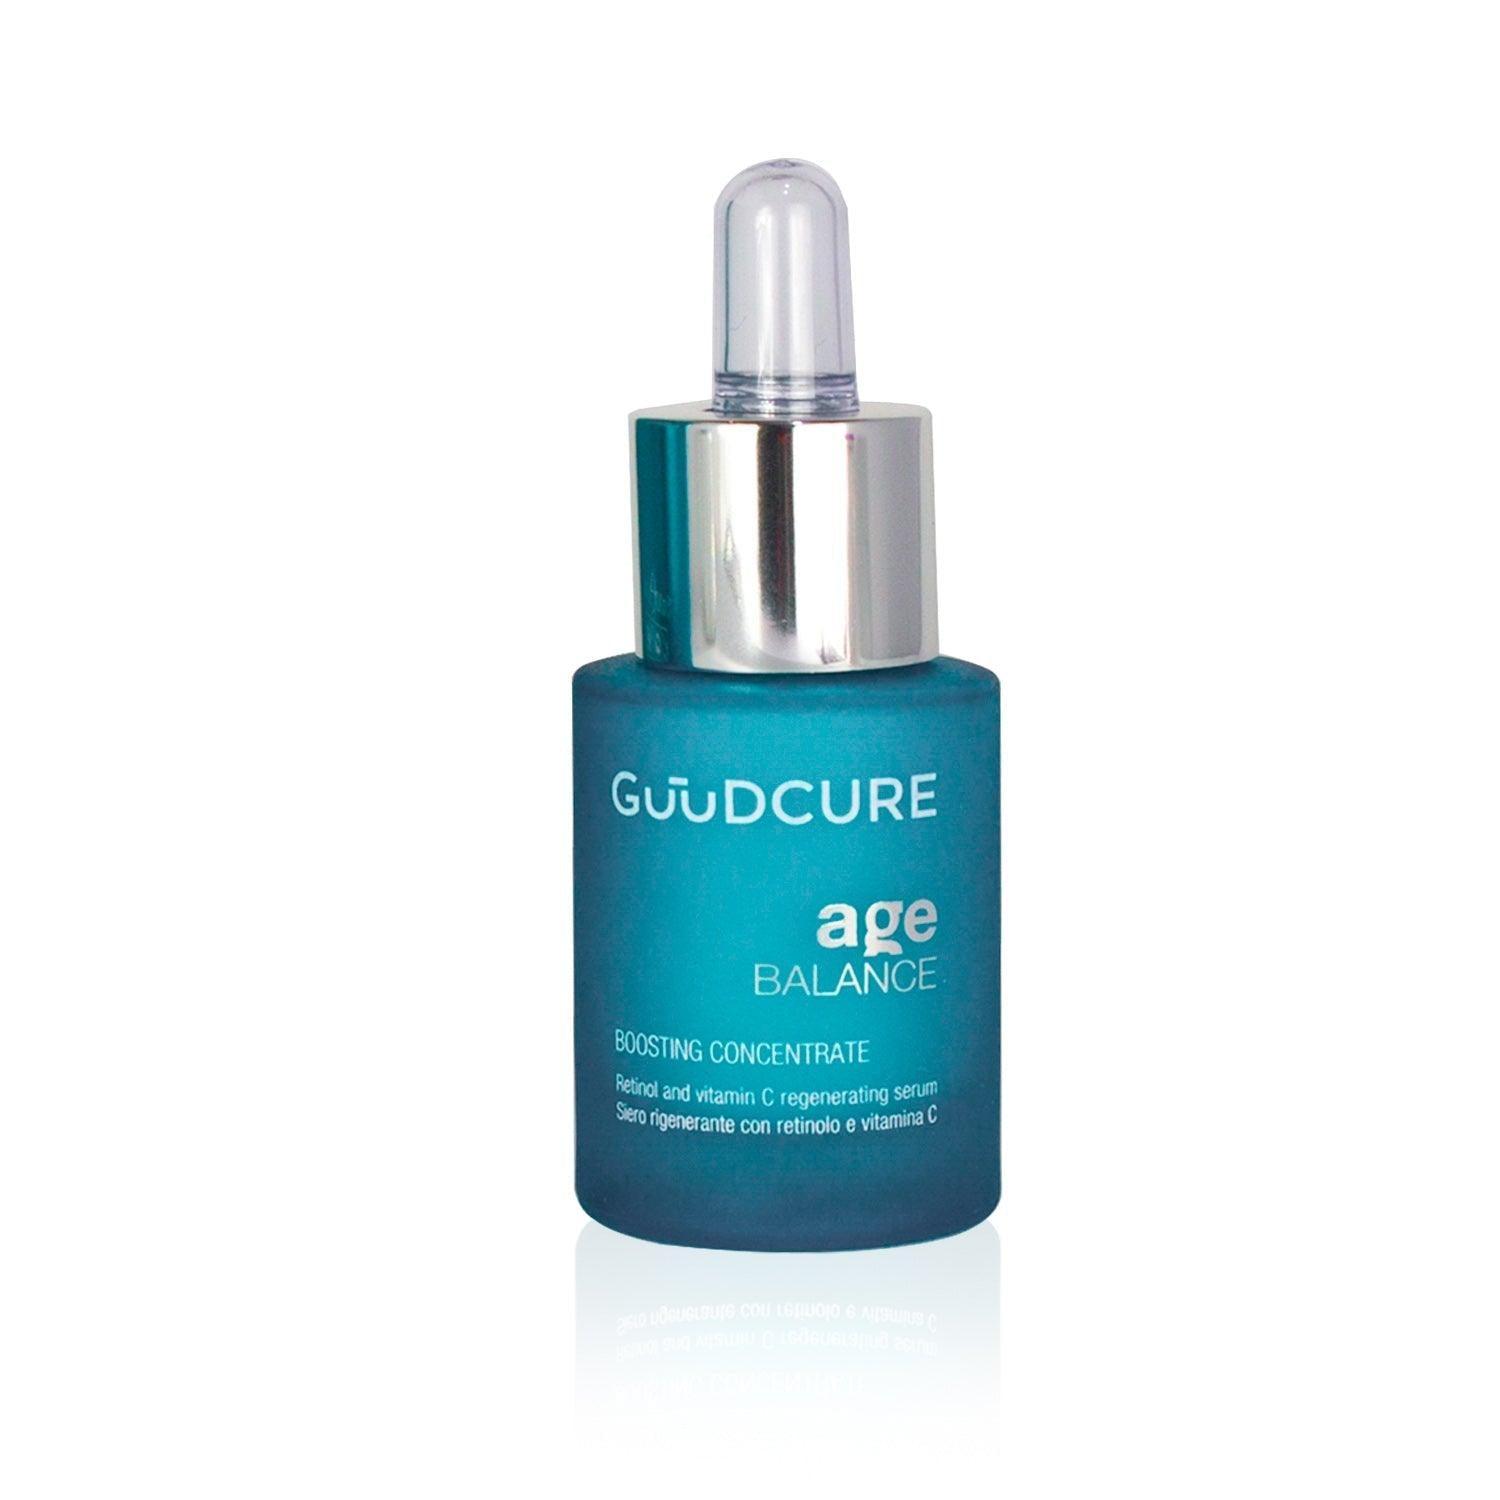 Guudcure Age Balance Boosting Concentrate 15 ml - Mrayti Store